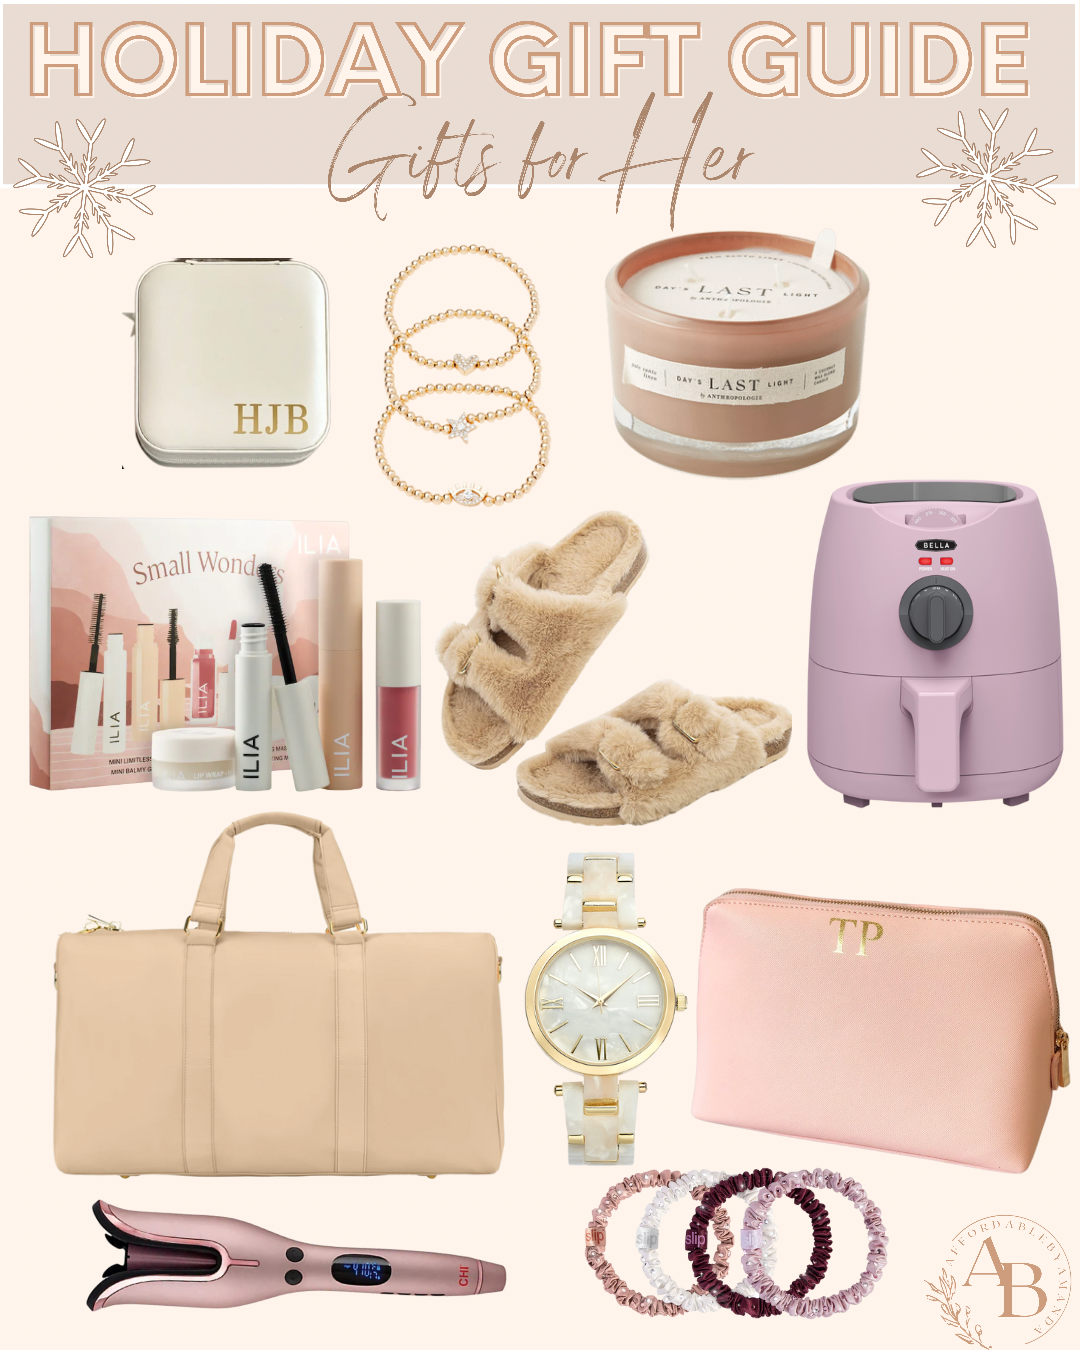 Gift Guide for every kind of HER